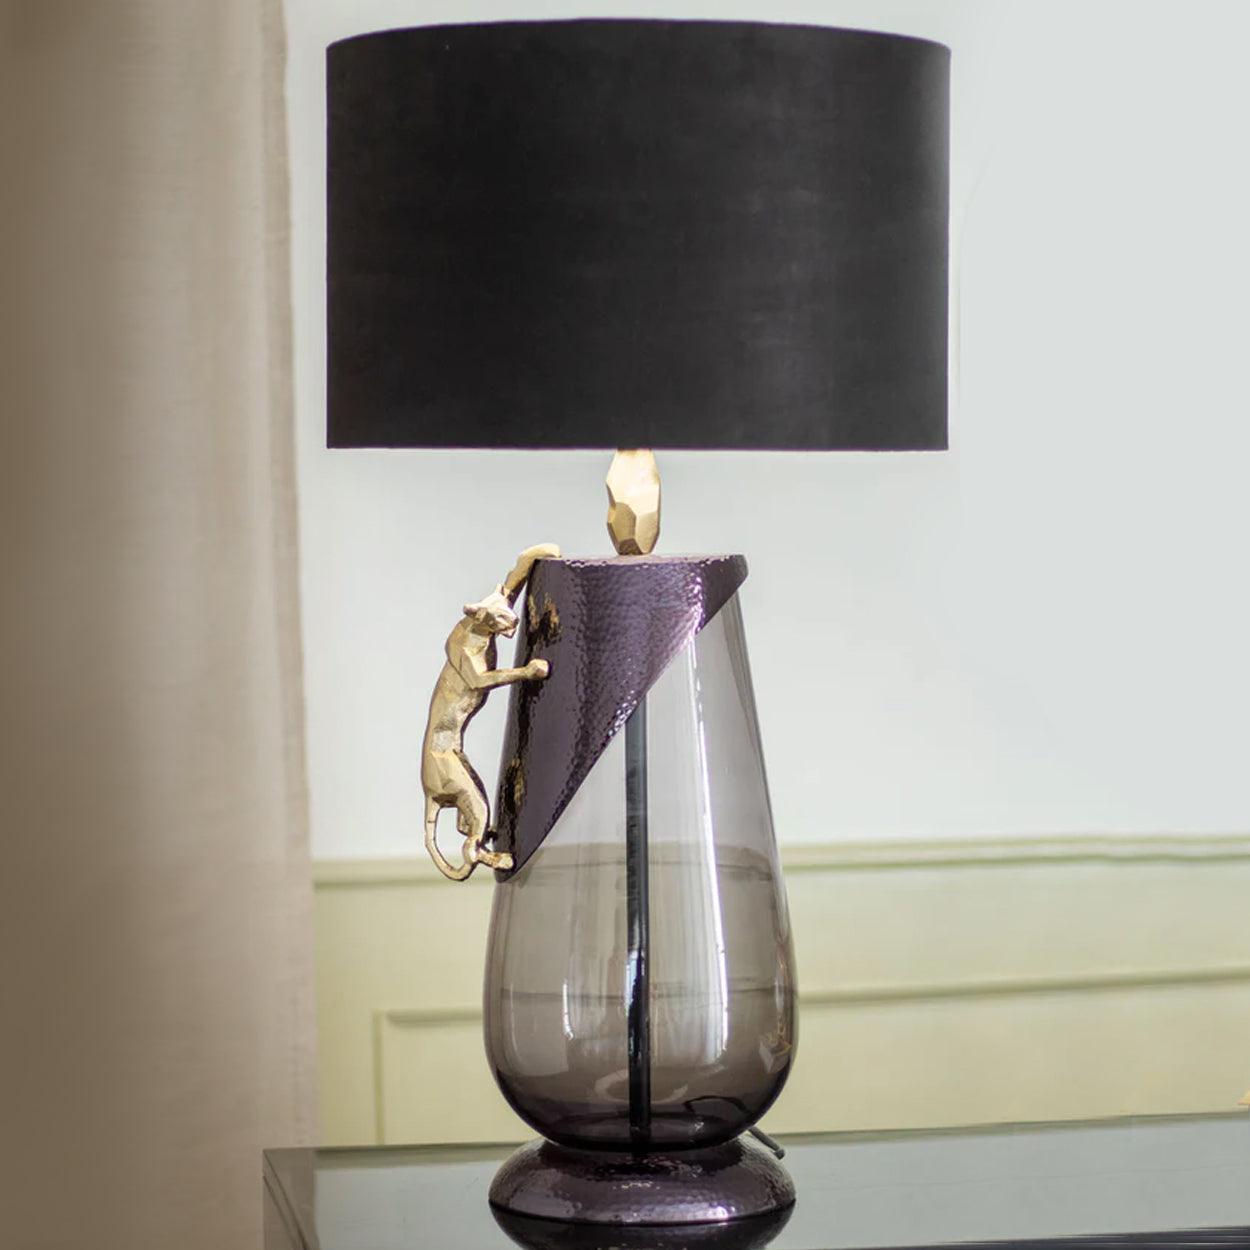 ABSTRACT PANTHER HAND MADE GLASS AND METAL TABLE LAMP - Ankur Lighting